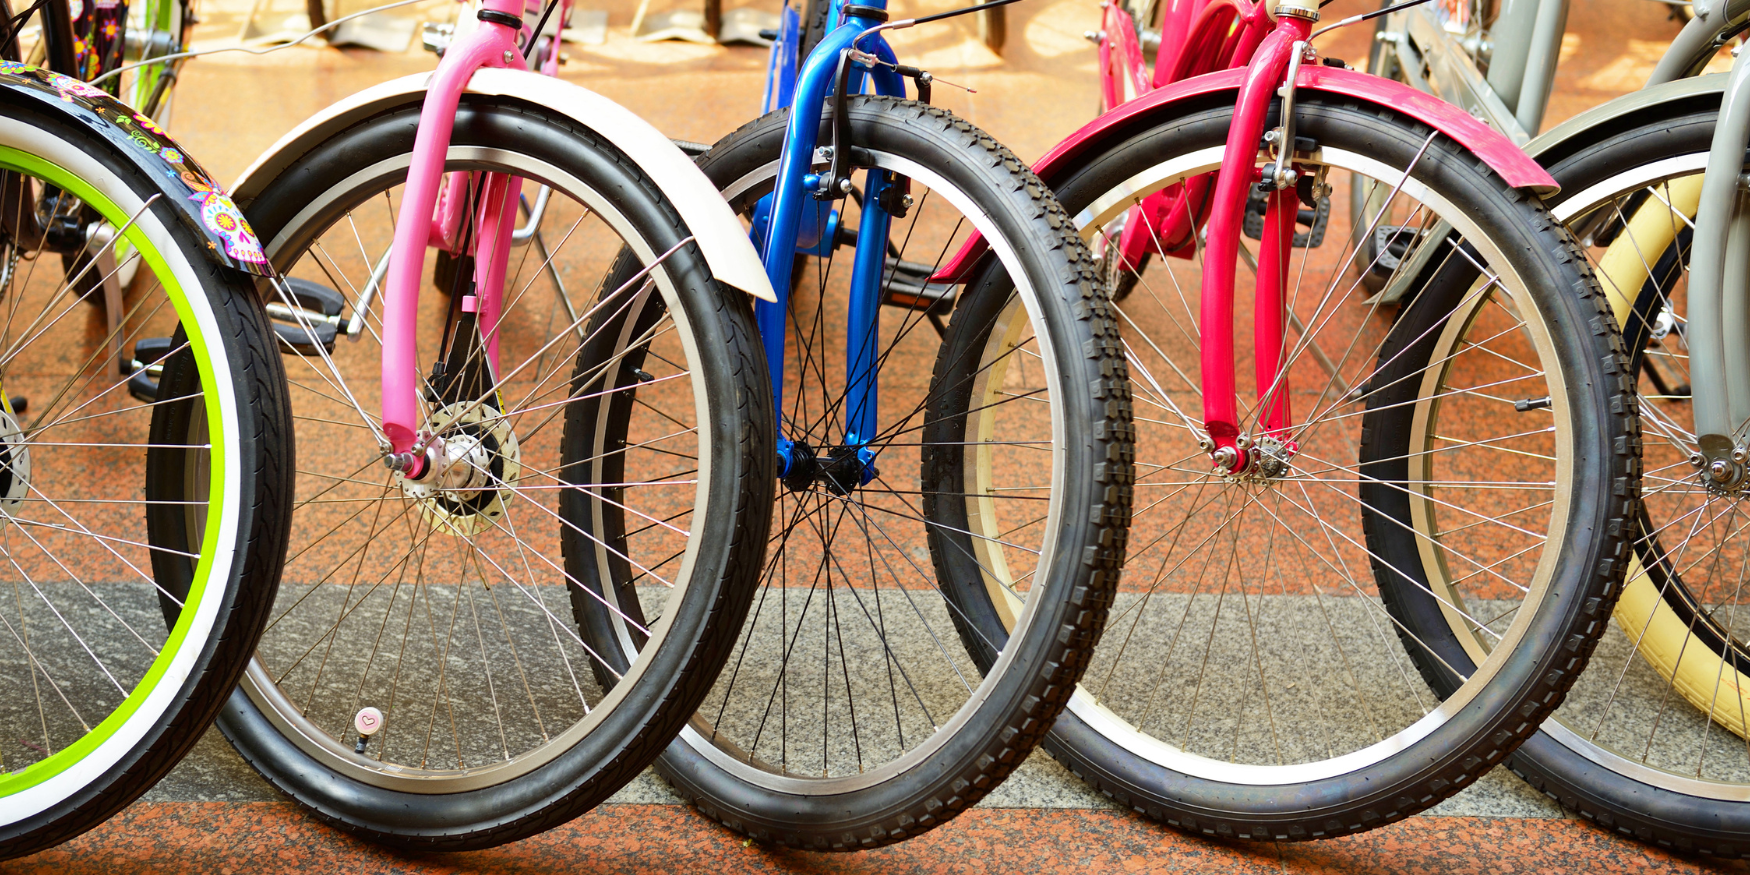 Ride Into Fun With These Community Bike Rides - Oak Park & the Near West Suburbs